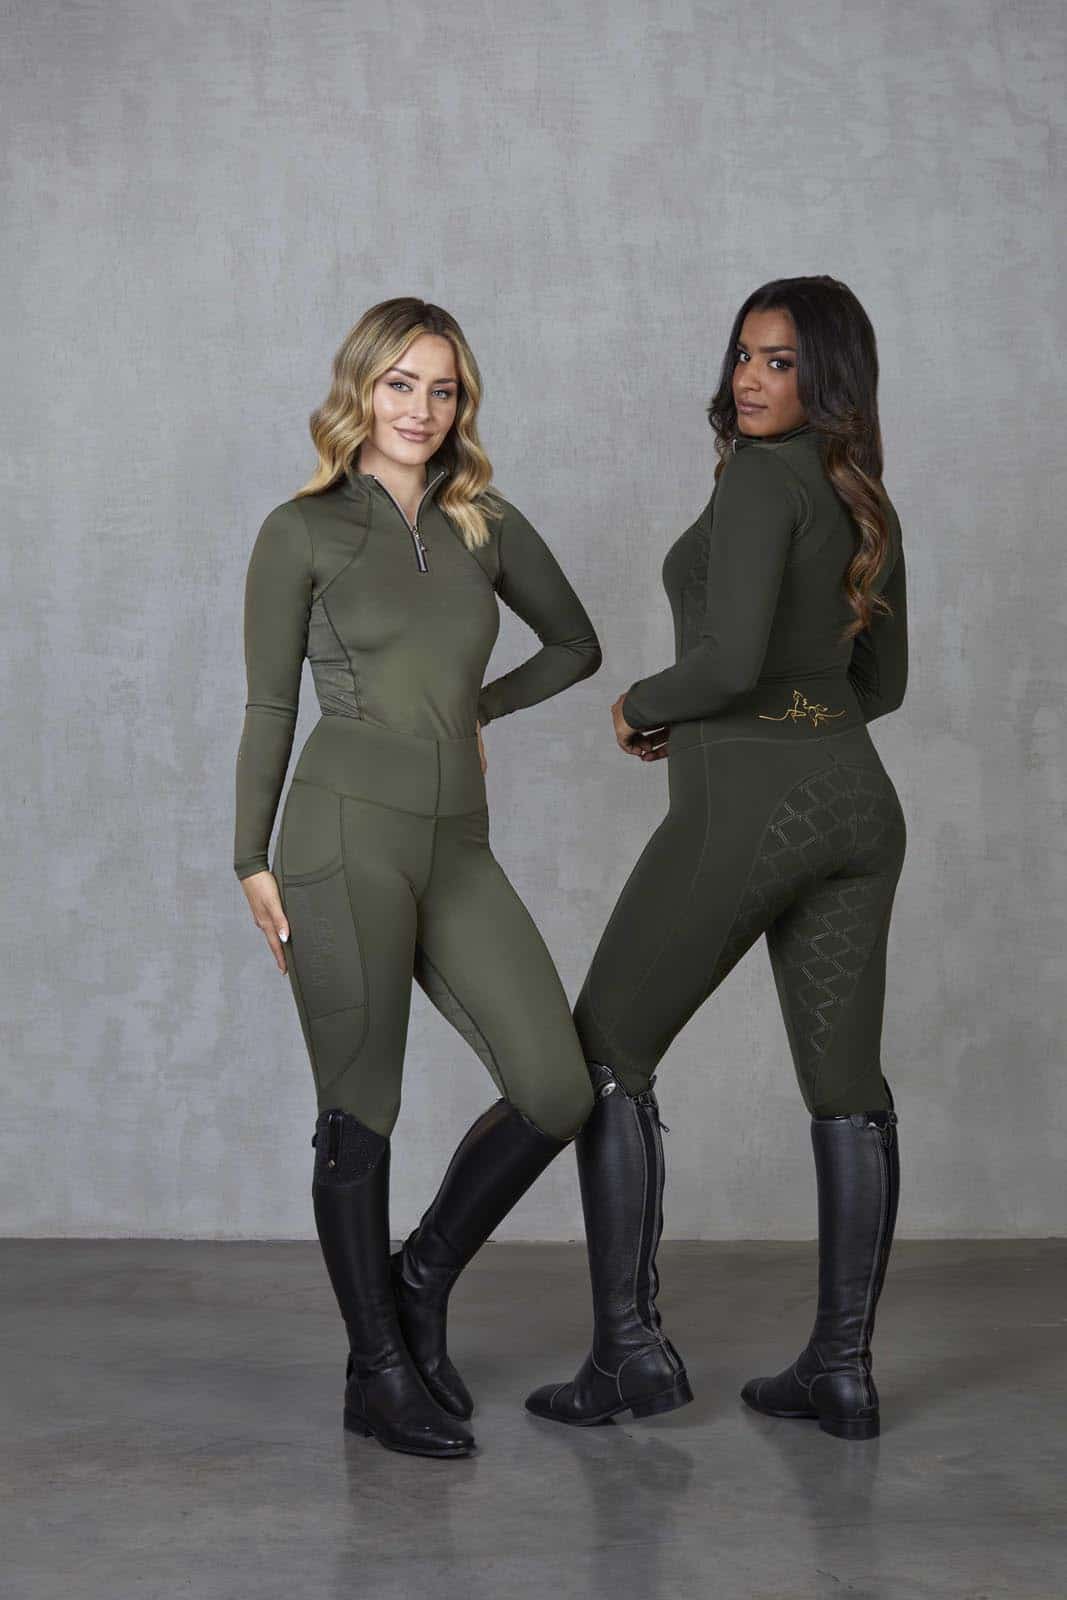 Two models standing side by side. The model on the left is wearing our fleece lined khaki base layer and matching riding leggings. The model on the right is wearing our green base layer and leggings.